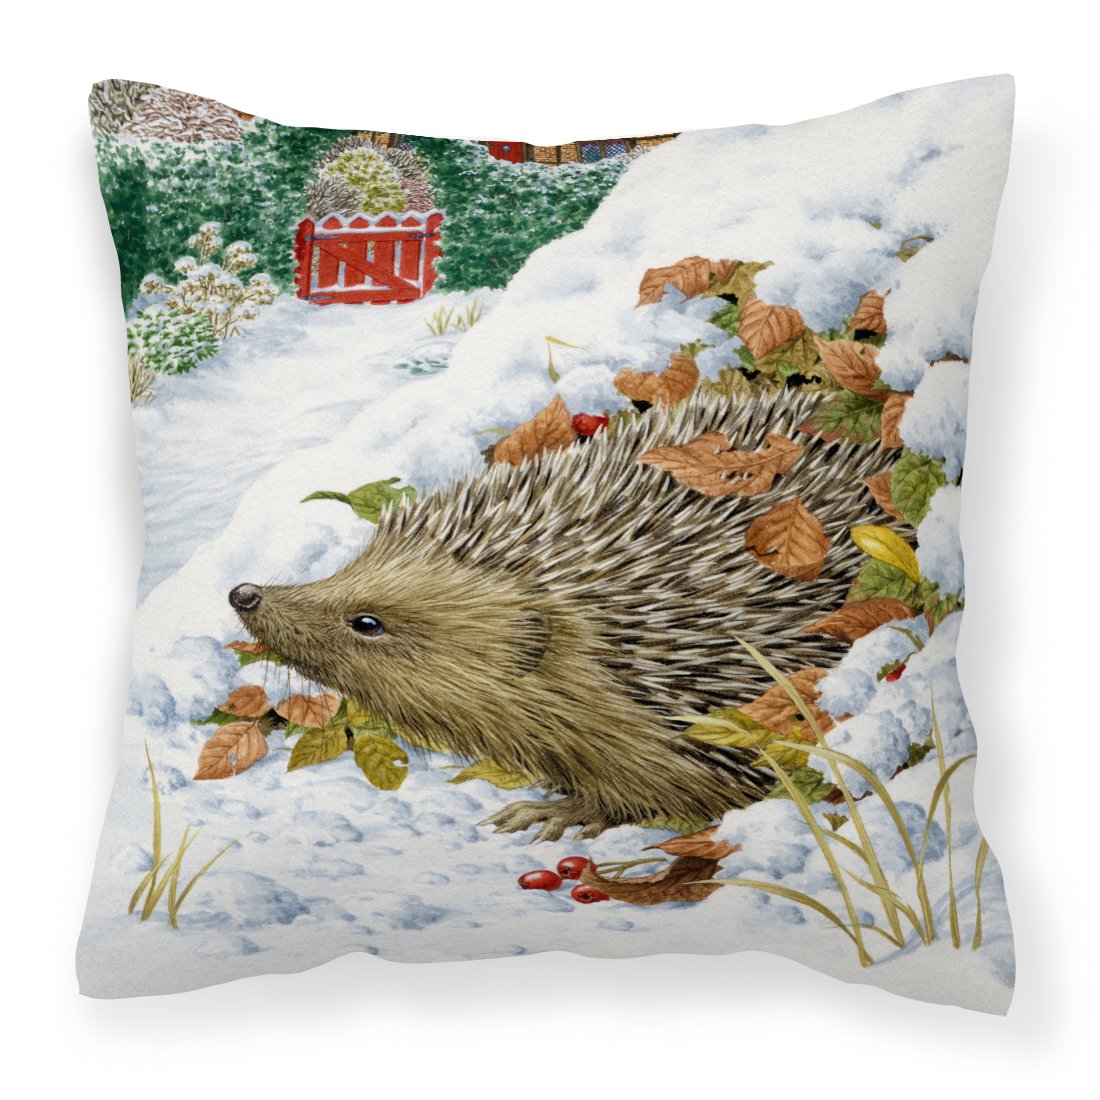 Hedgehog and Red Gate Cottage Canvas Decorative Pillow by Caroline's Treasures